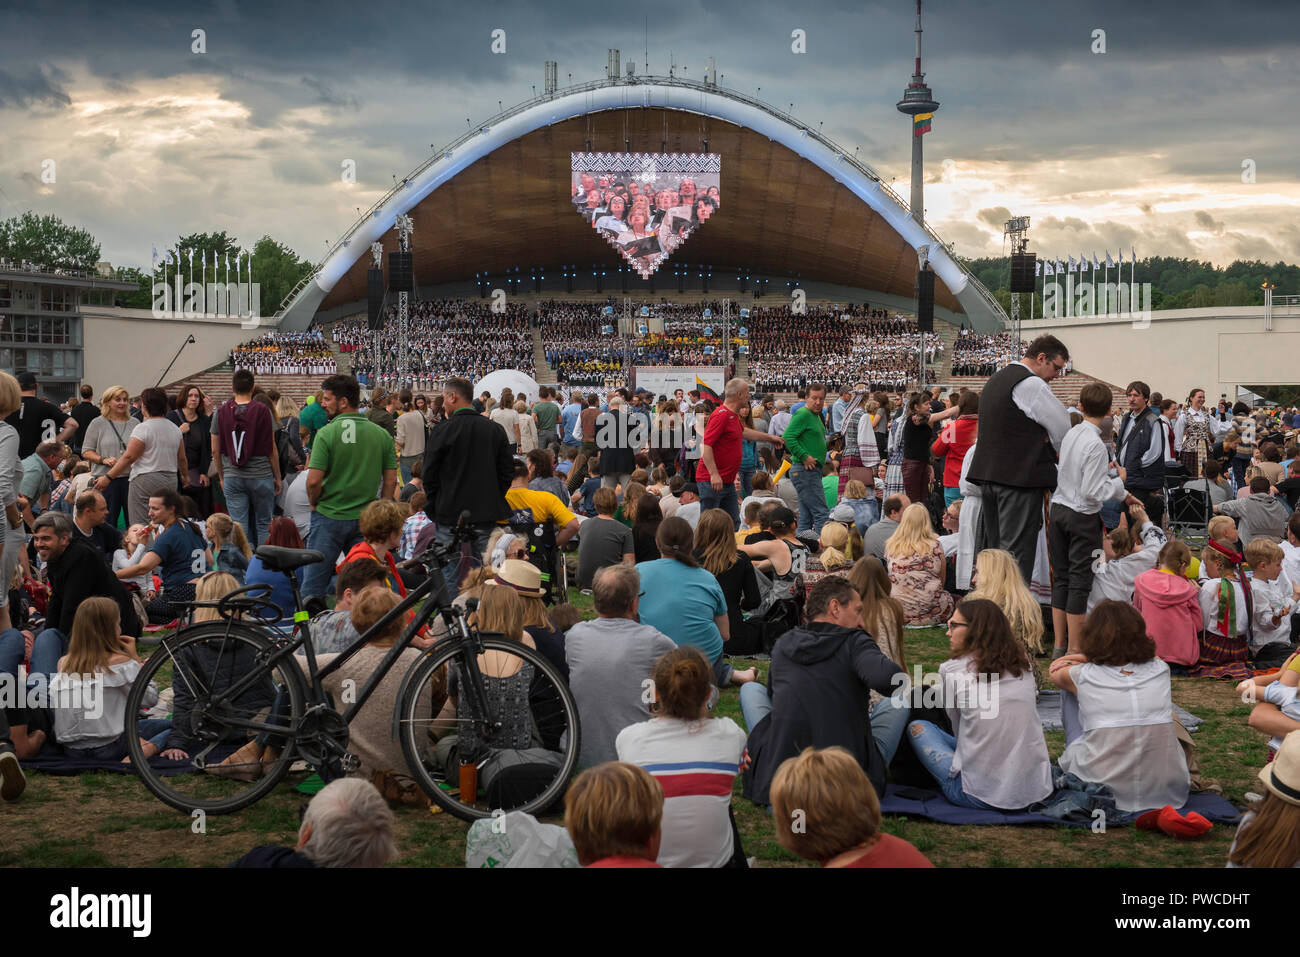 Lithuania people, view of people gathered at dusk in front of the Vingis Park amphitheatre during the Lithuanian Song And Dance Festival in Vilnius. Stock Photo